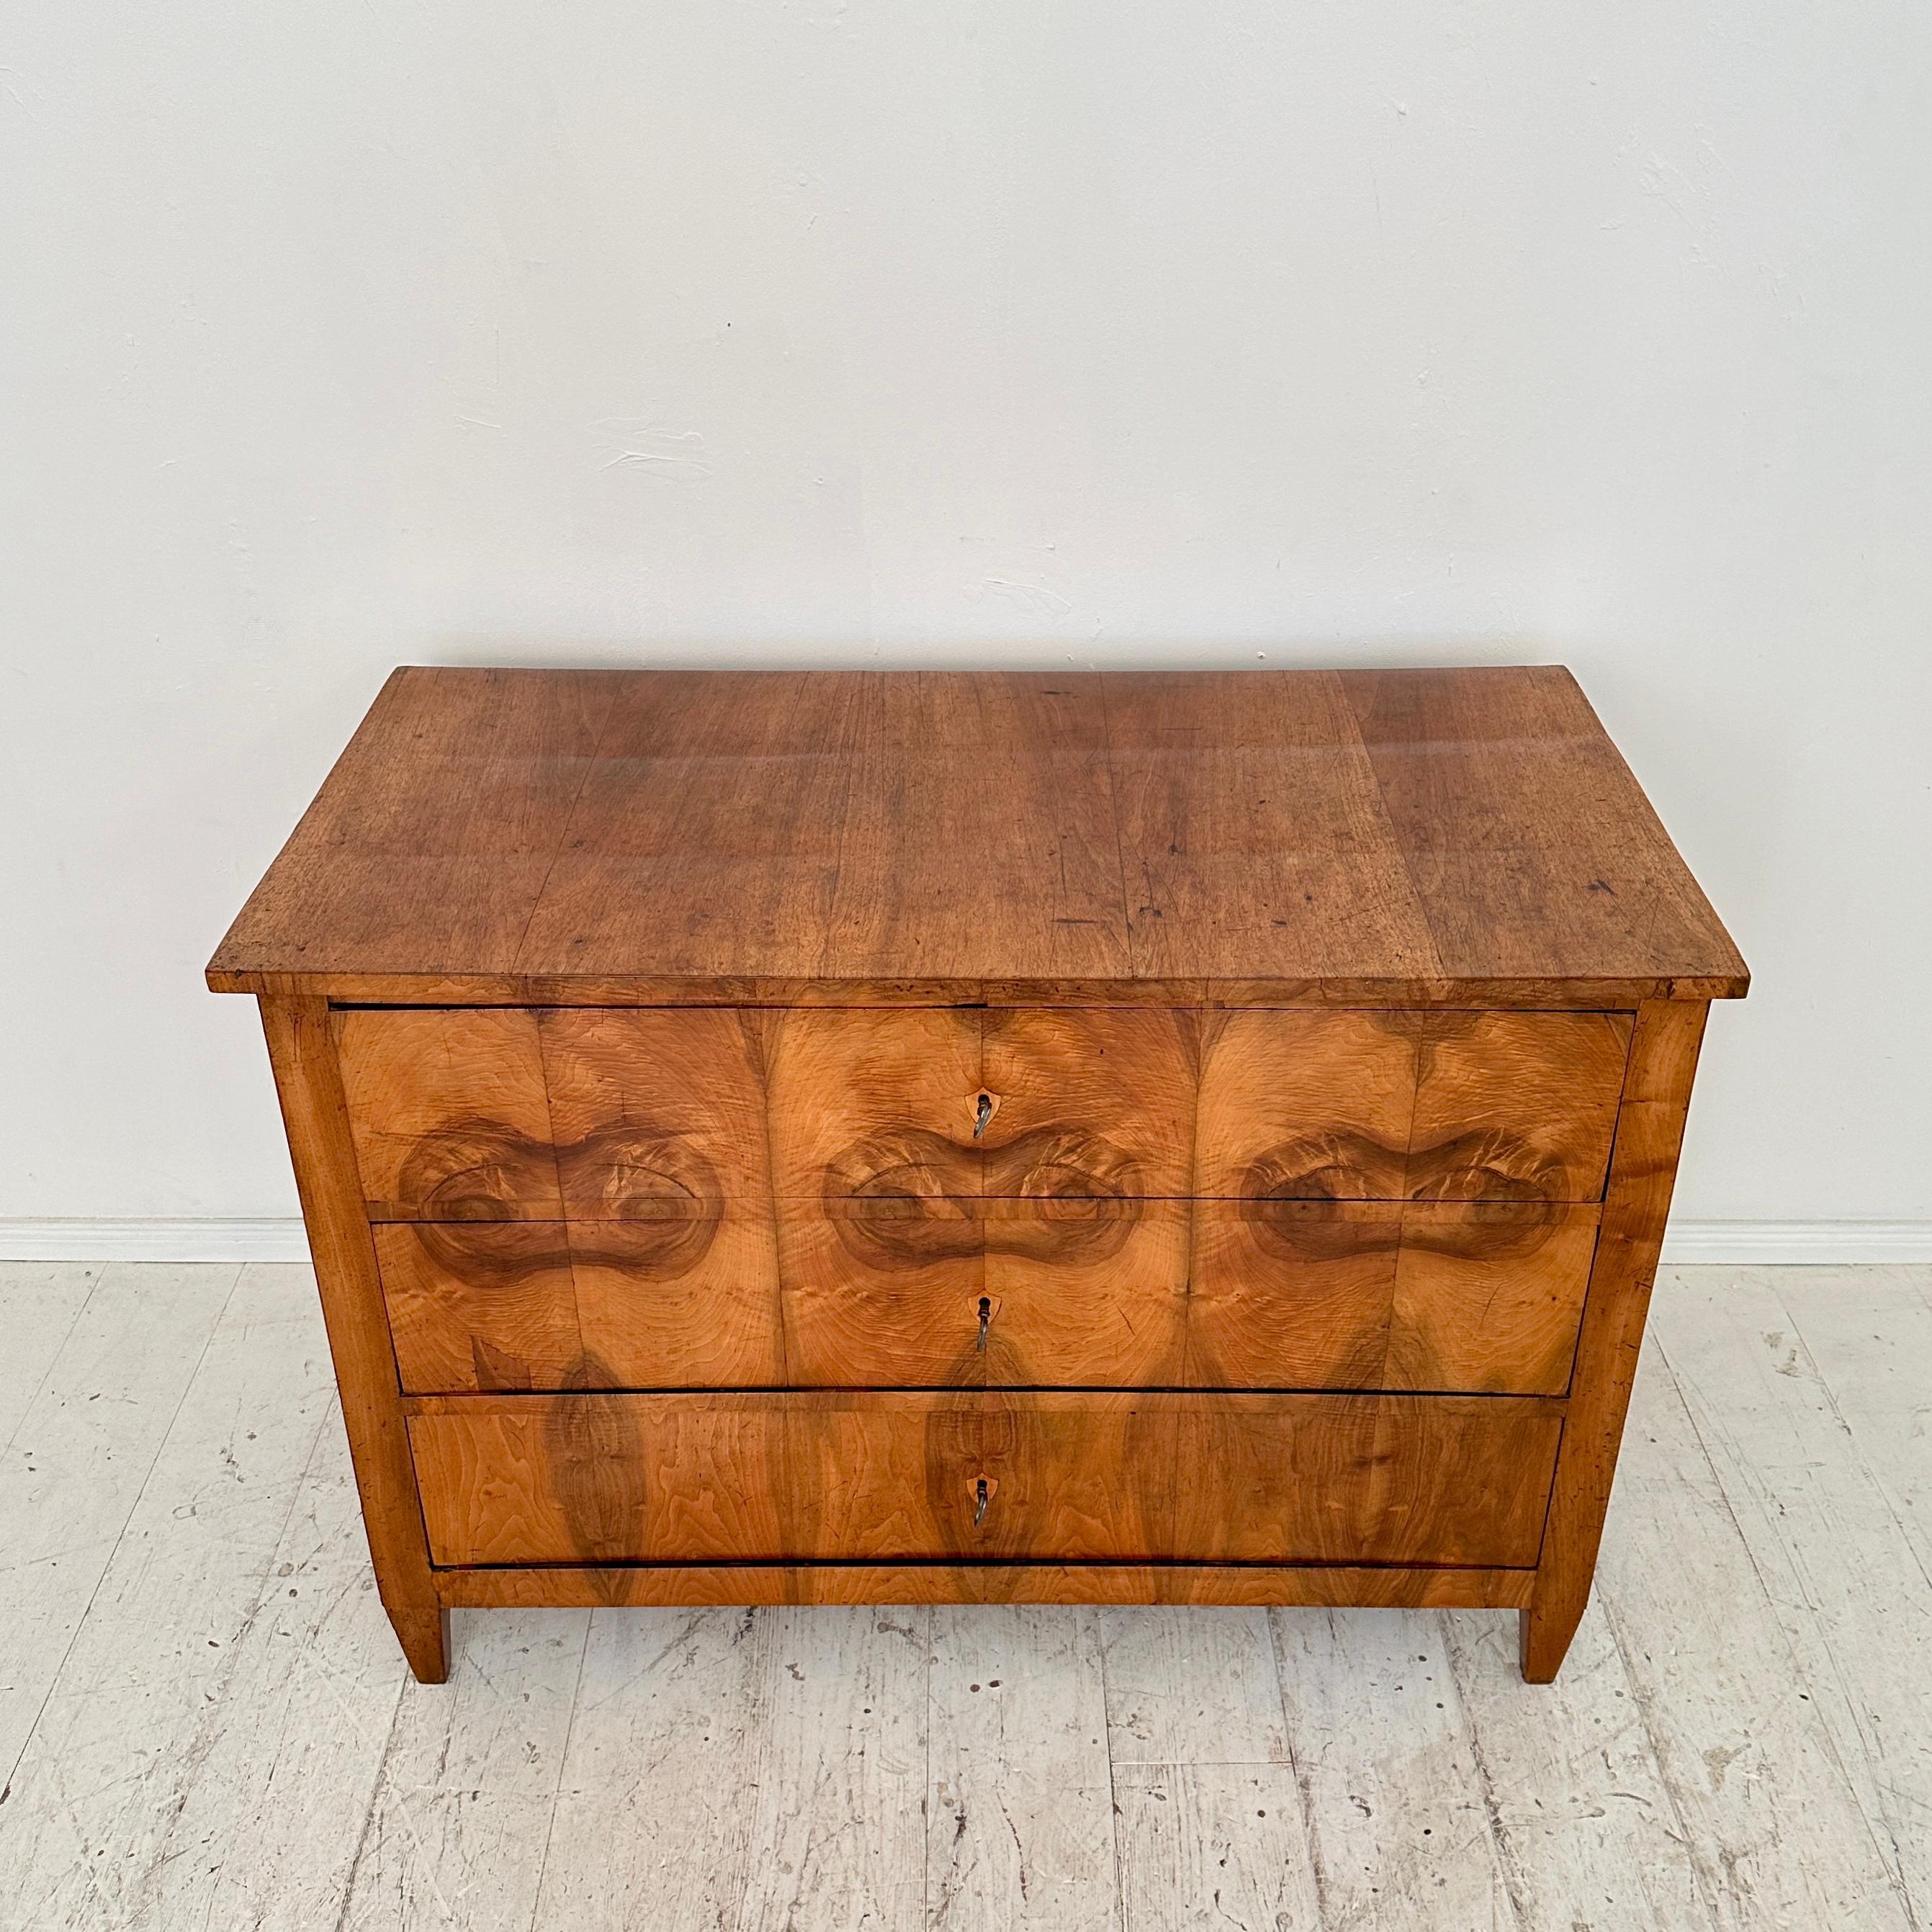 19th Century German Biedermeier Chest of Drawers in Walnut with 3 Drawers, 1820 For Sale 1